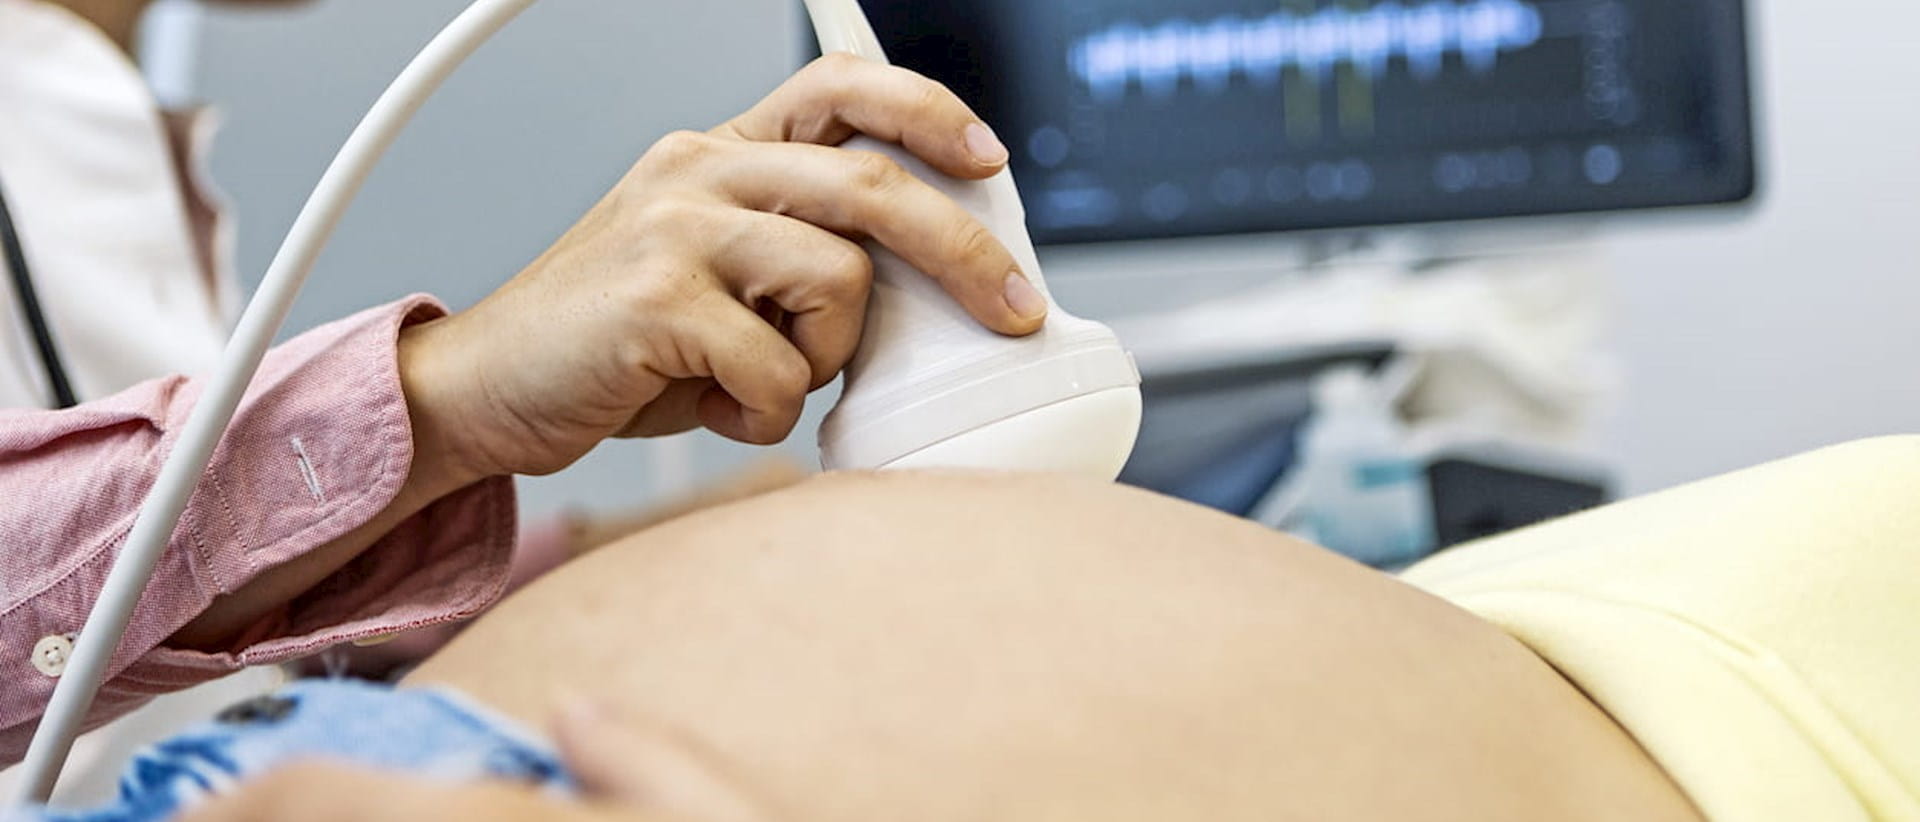 Photograph of pregnant patient undergoing ultrasound examination